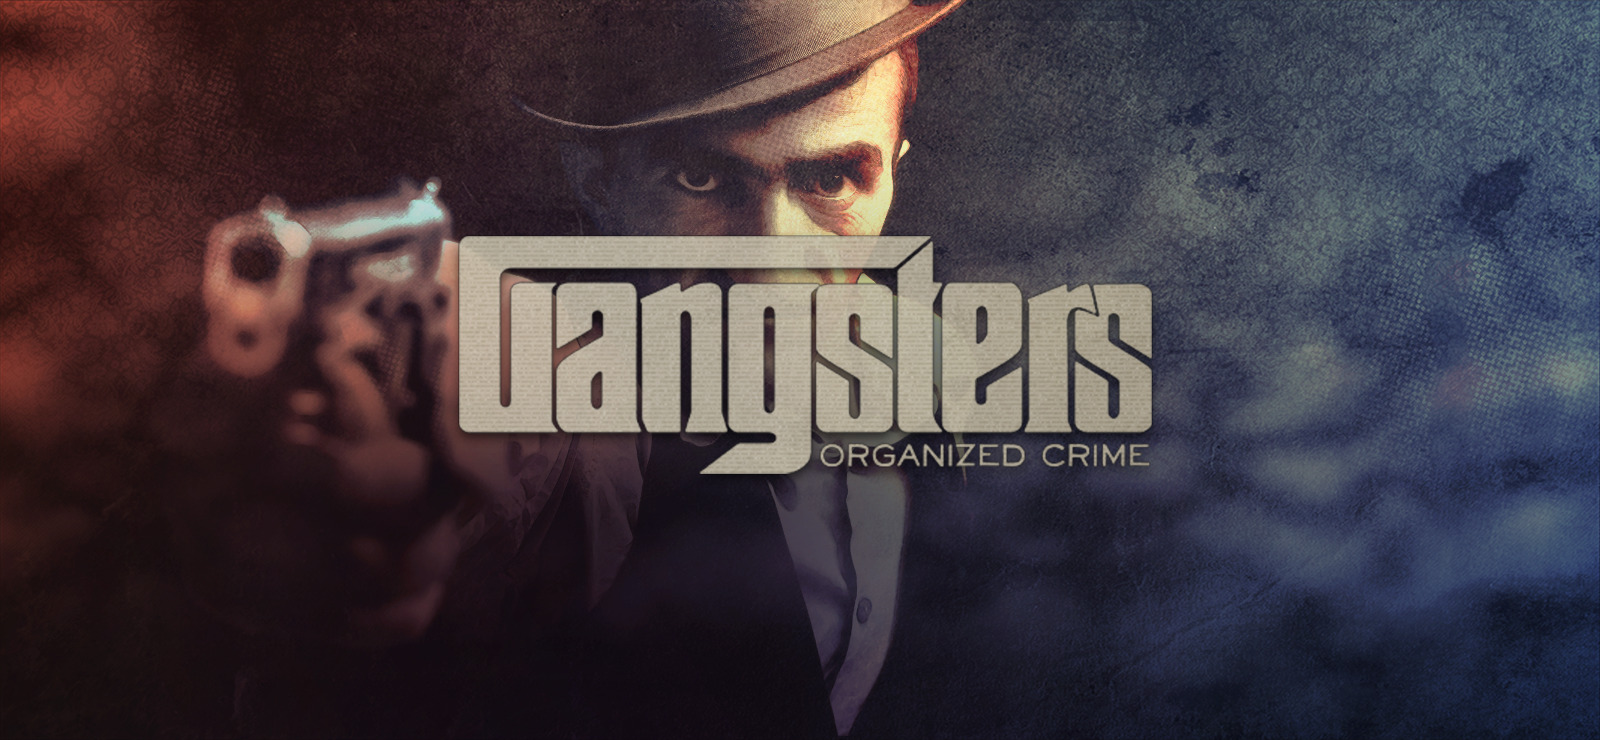 gangsters organized crime